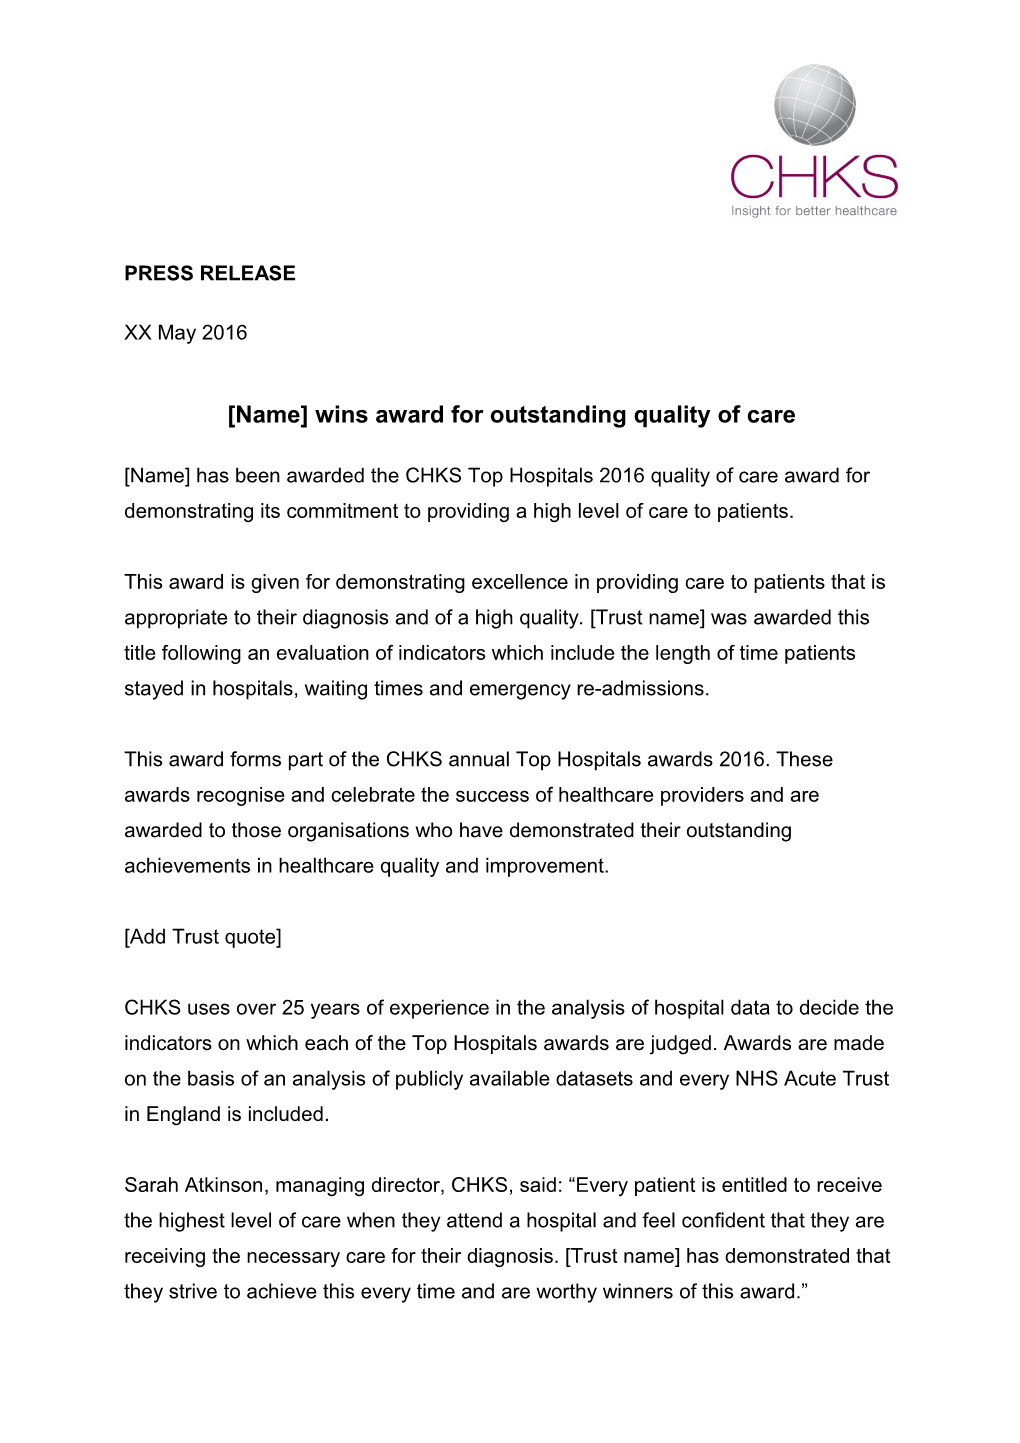 Name Wins Award for Outstanding Quality of Care